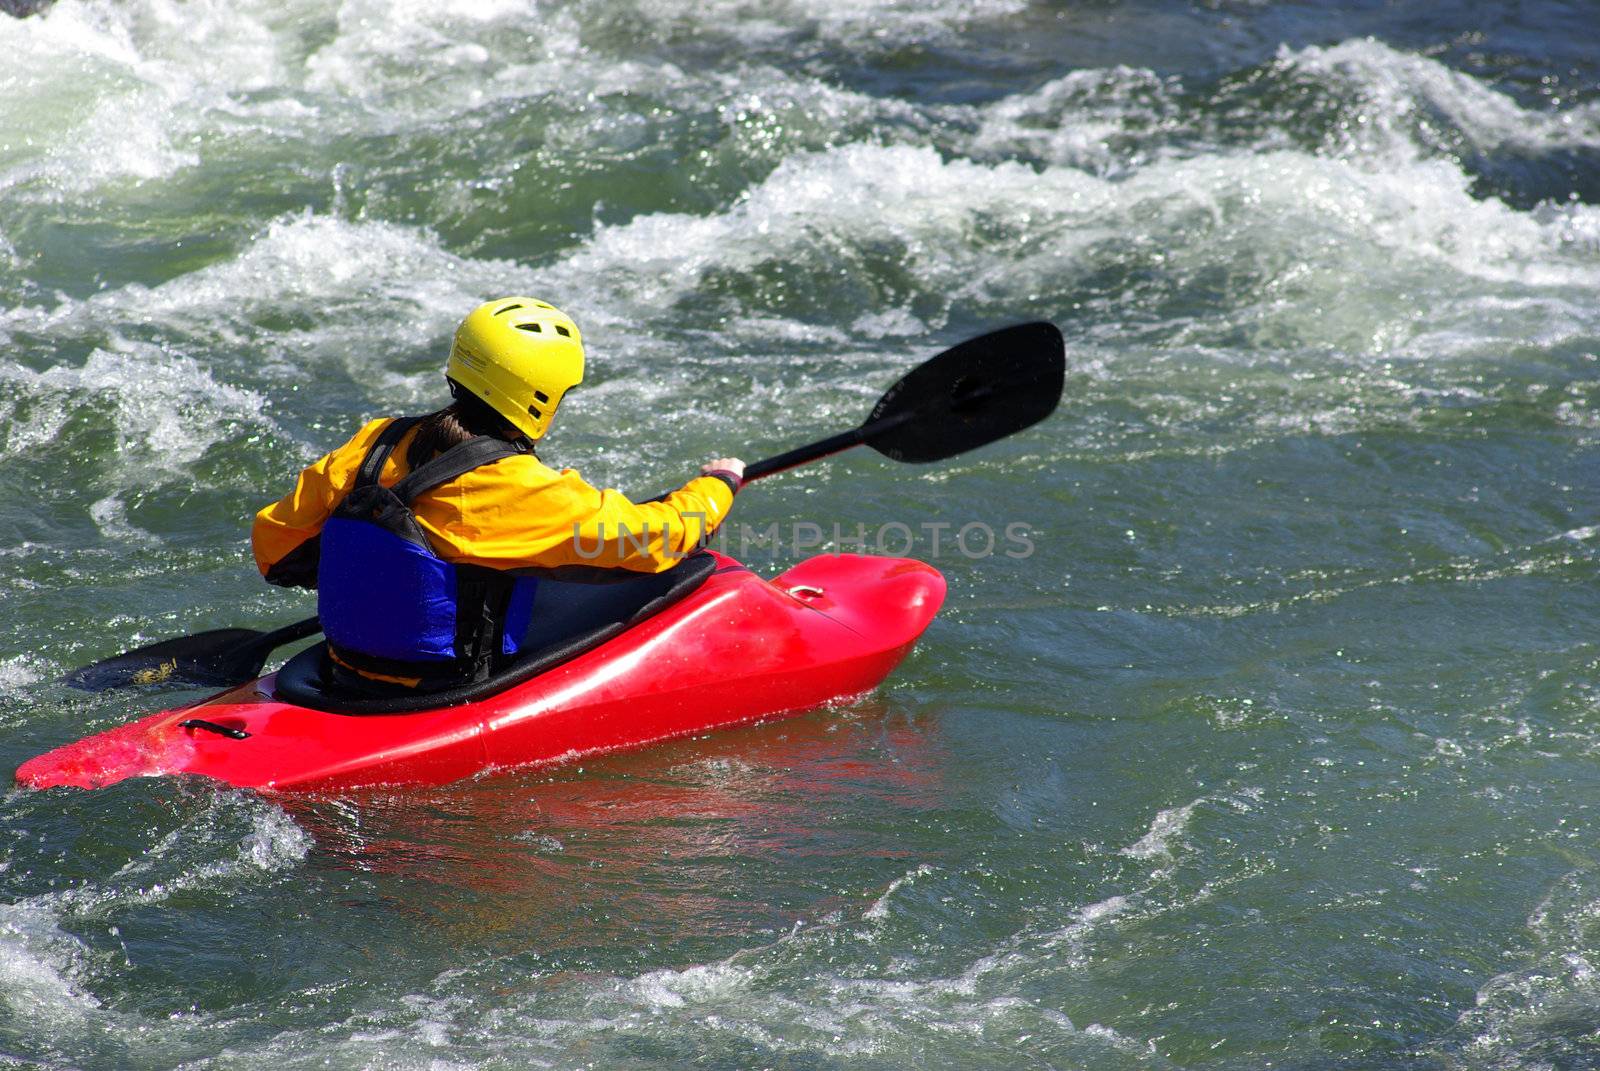 Kayak In The Whitewater by bendicks